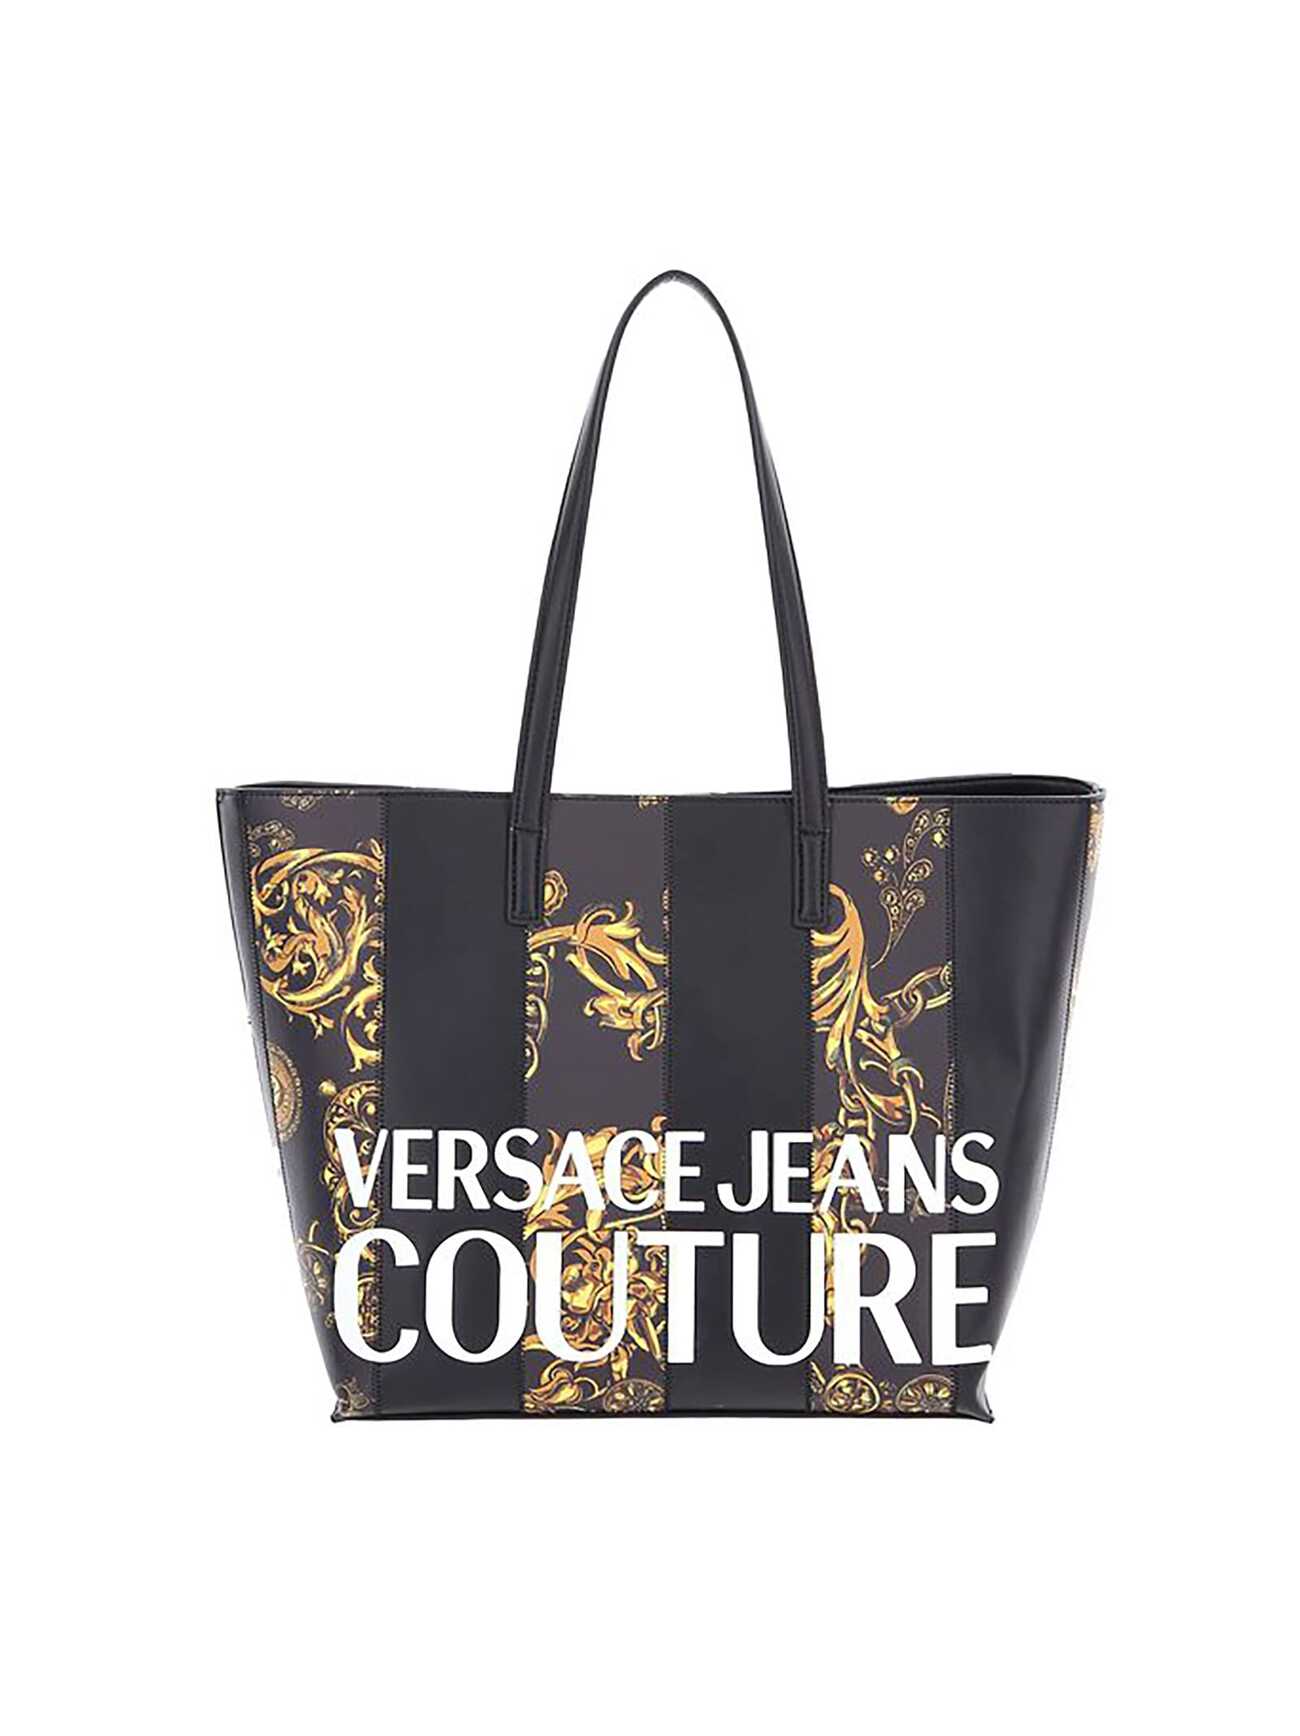 Versace Jeans Couture Baroque Tote Bag